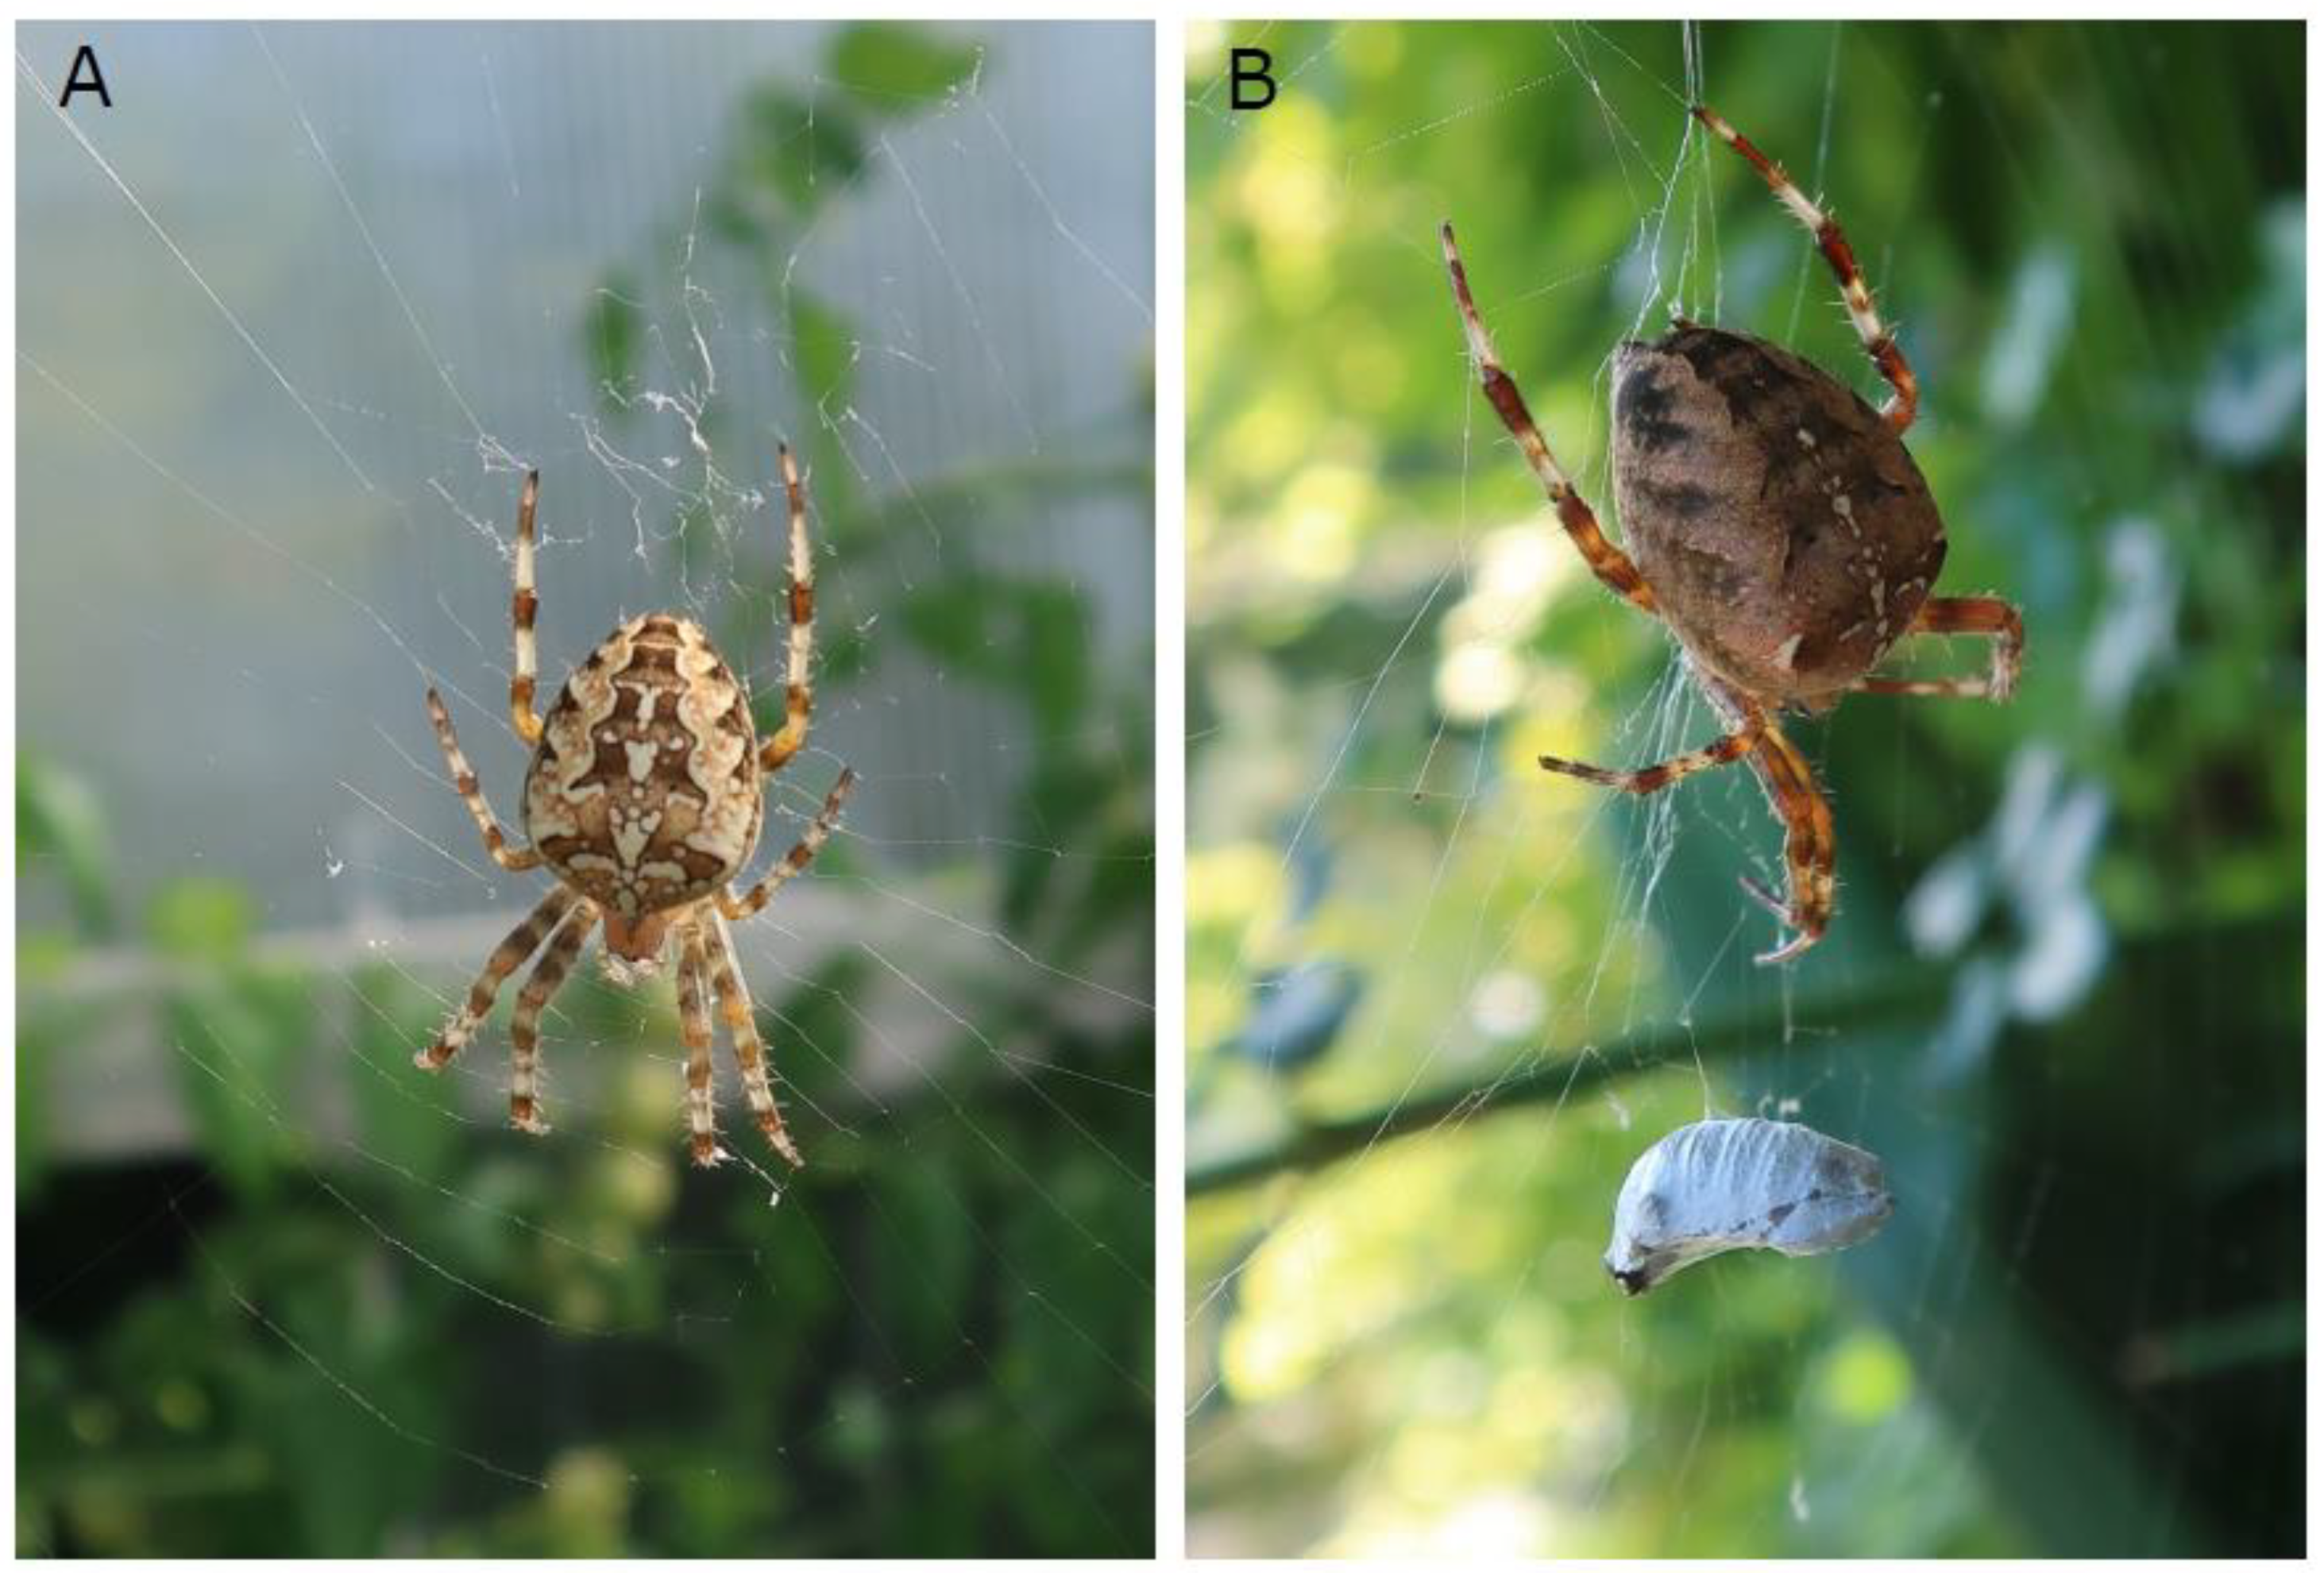 Insects | Free Full-Text | Where Have All the Spiders Gone? Observations of  a Dramatic Population Density Decline in the Once Very Abundant Garden  Spider, Araneus diadematus (Araneae: Araneidae), in the Swiss